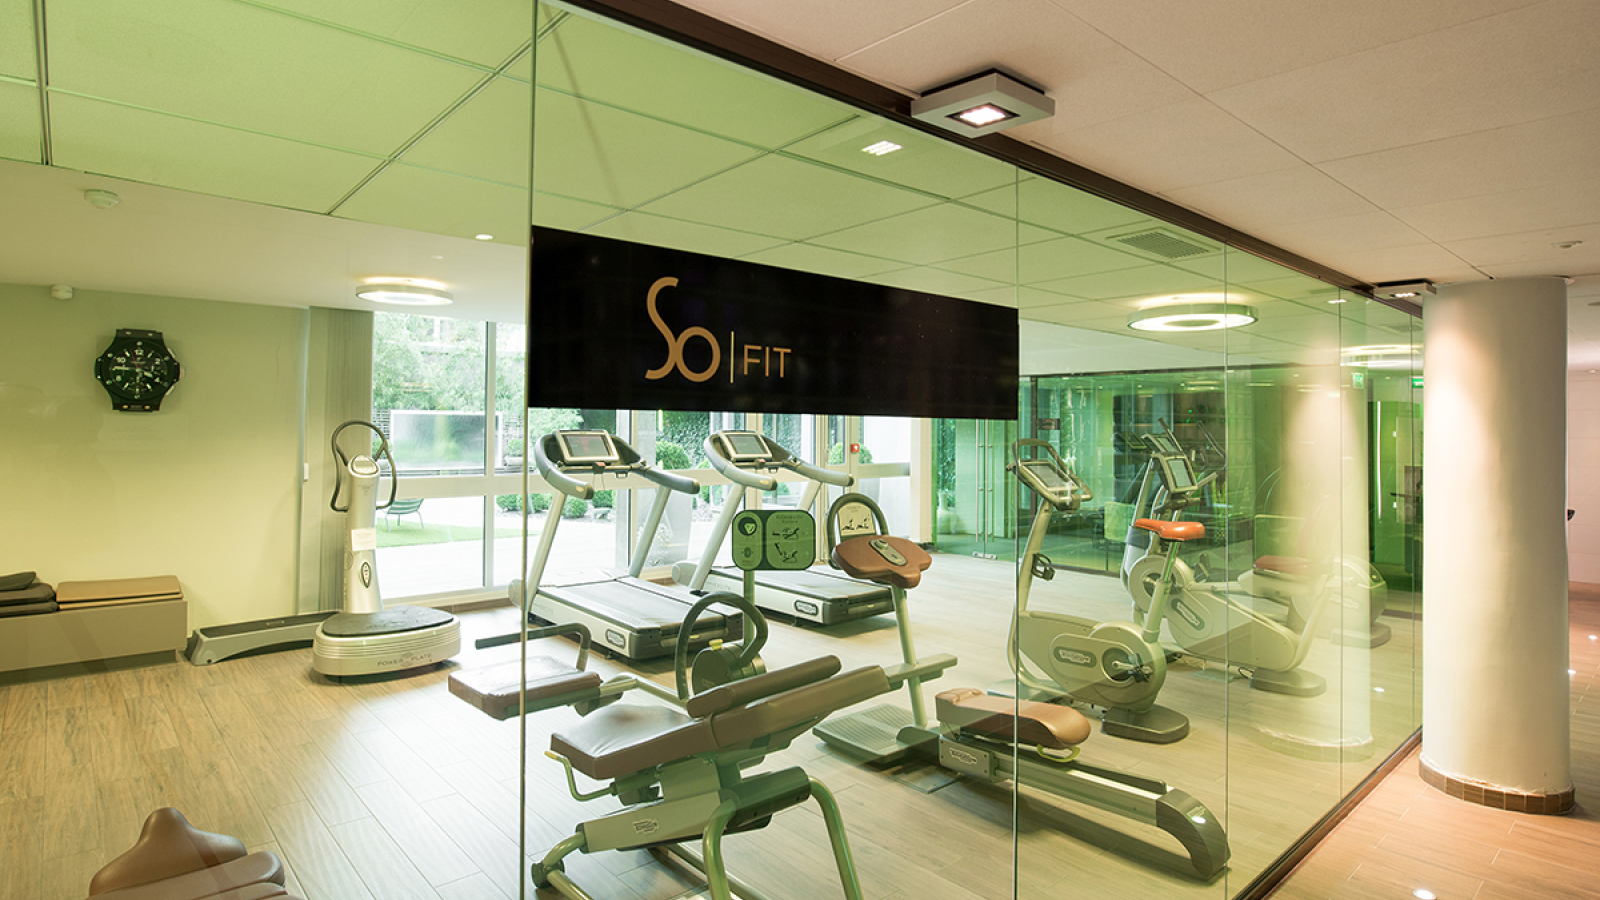 So FIT - Espace fitness